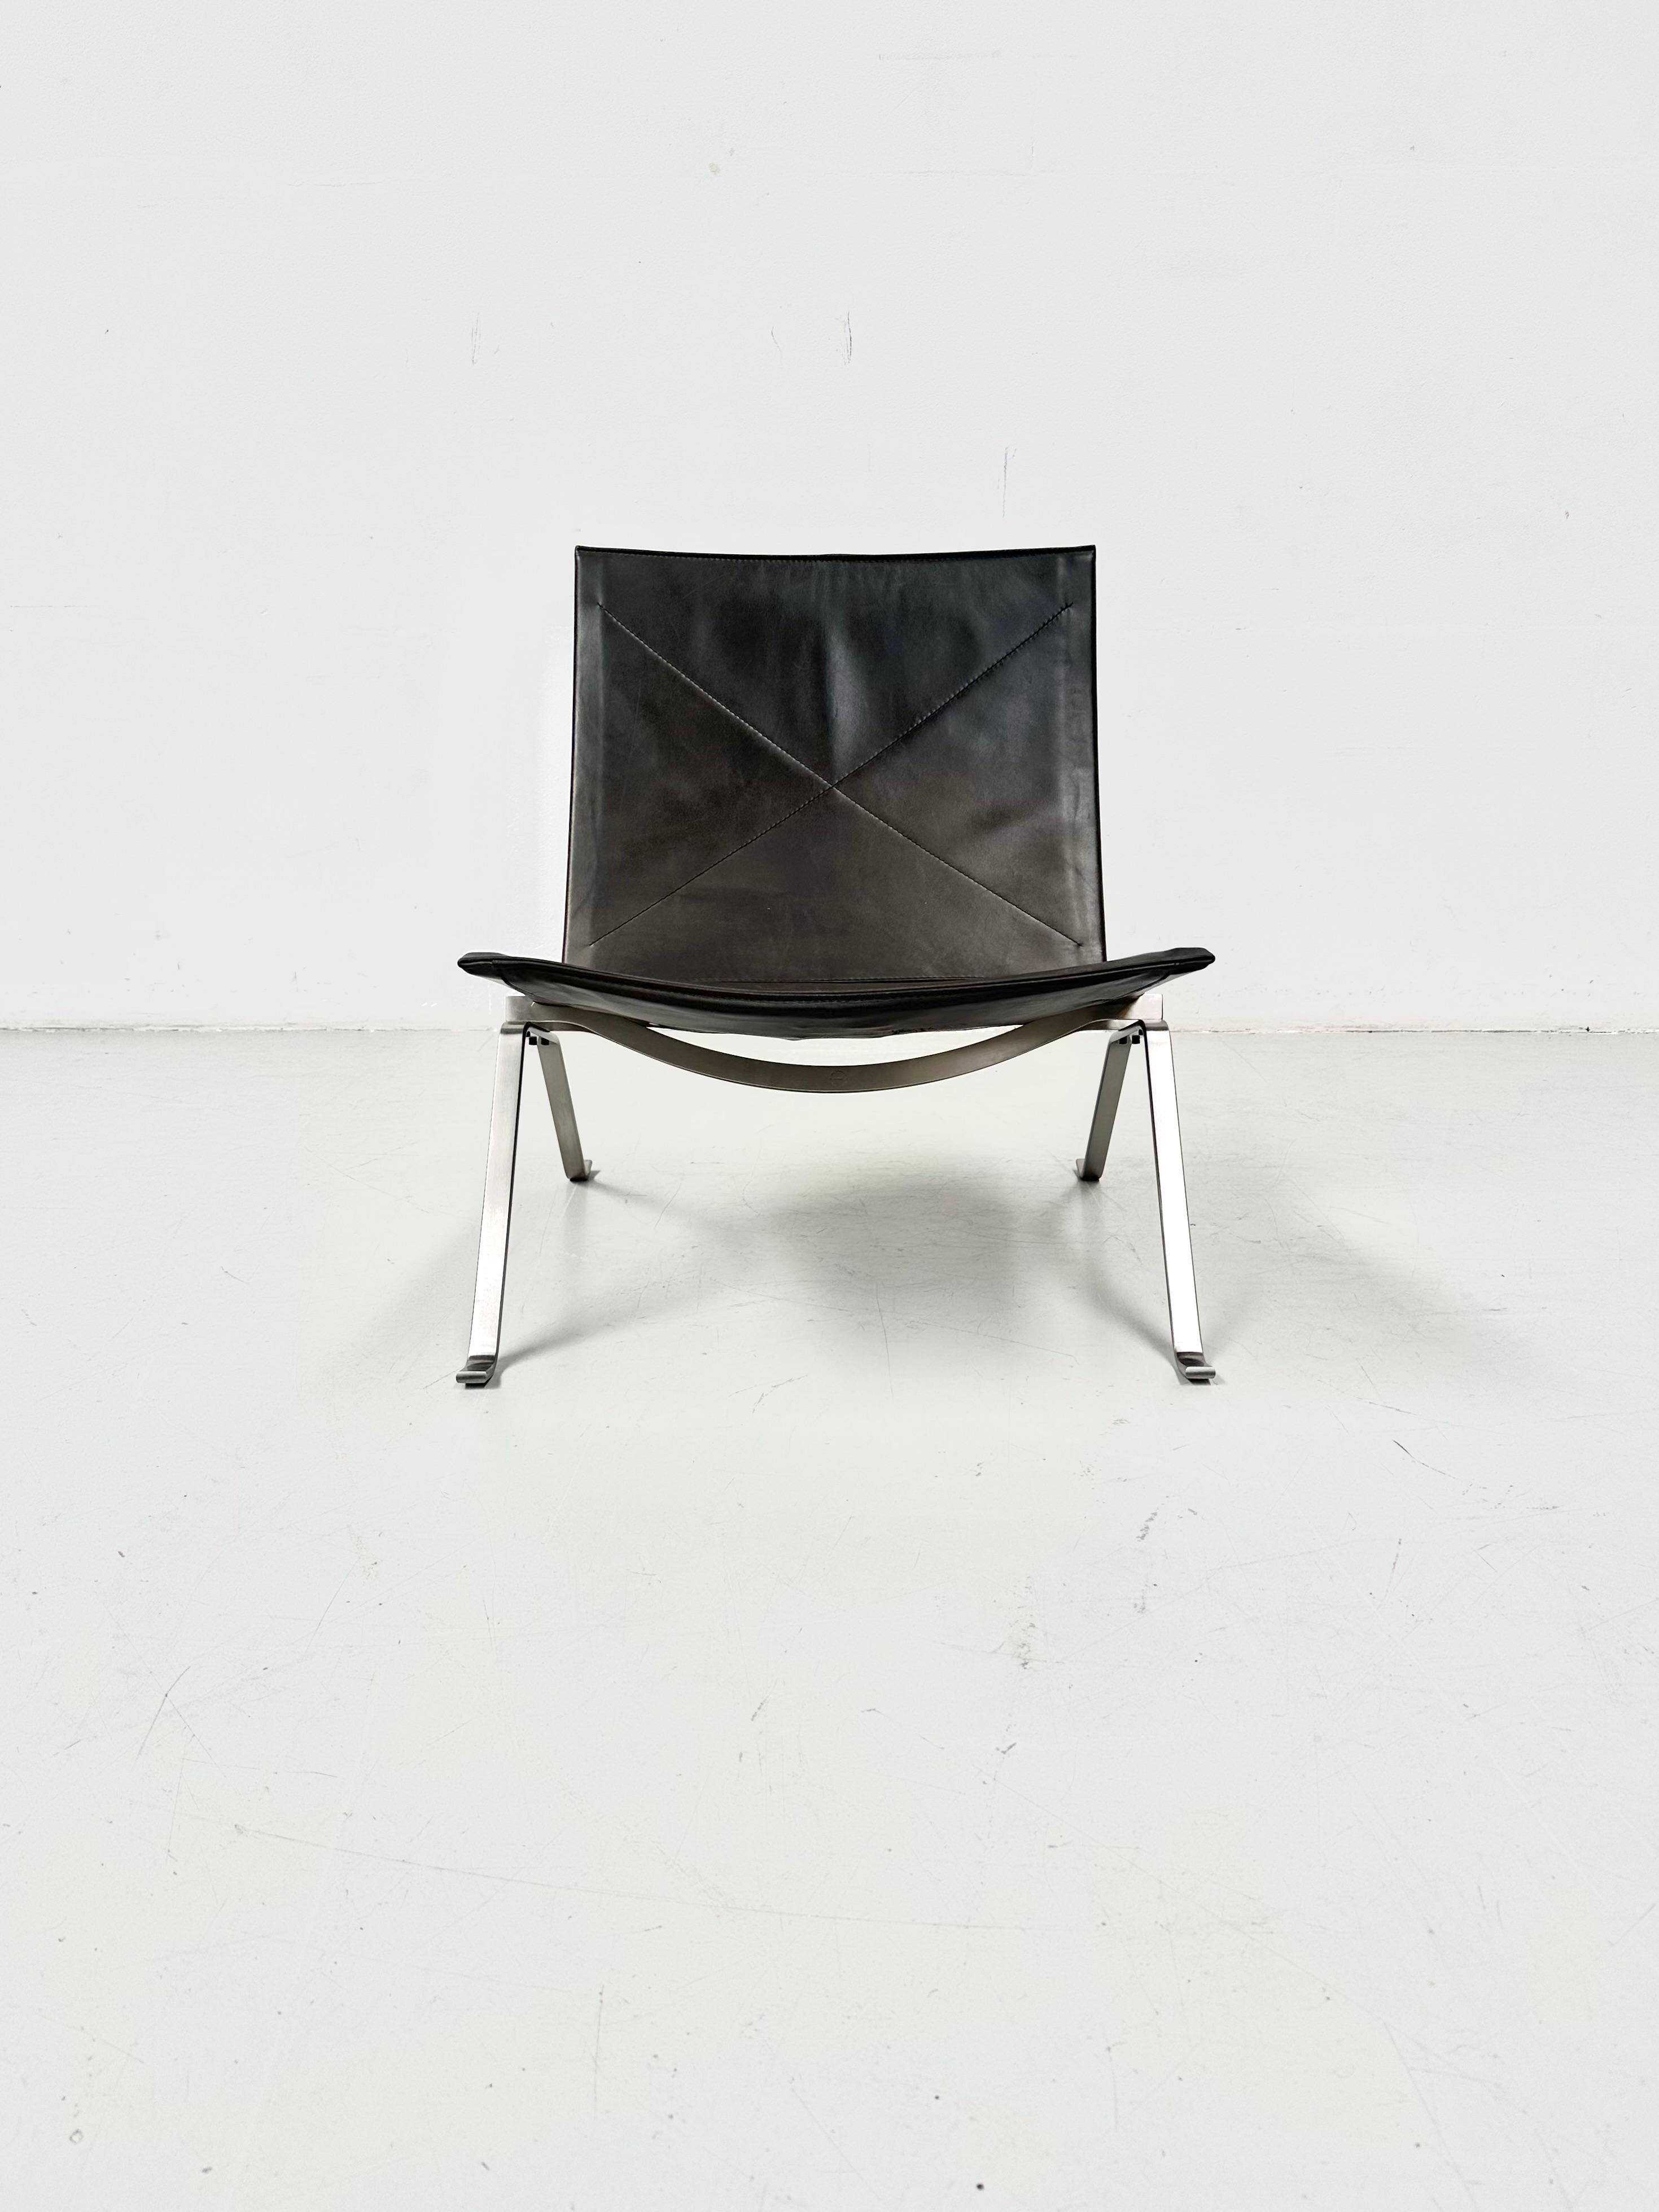 This chair was designed in 1956 by Poul Kjærholm in Denmark. it features a thick black leather seat and backrest and a flatsteel base.

Poul Kjærholm is a trained cabinetmaker who completed his studies at the Danish School of Arts and Crafts, Poul